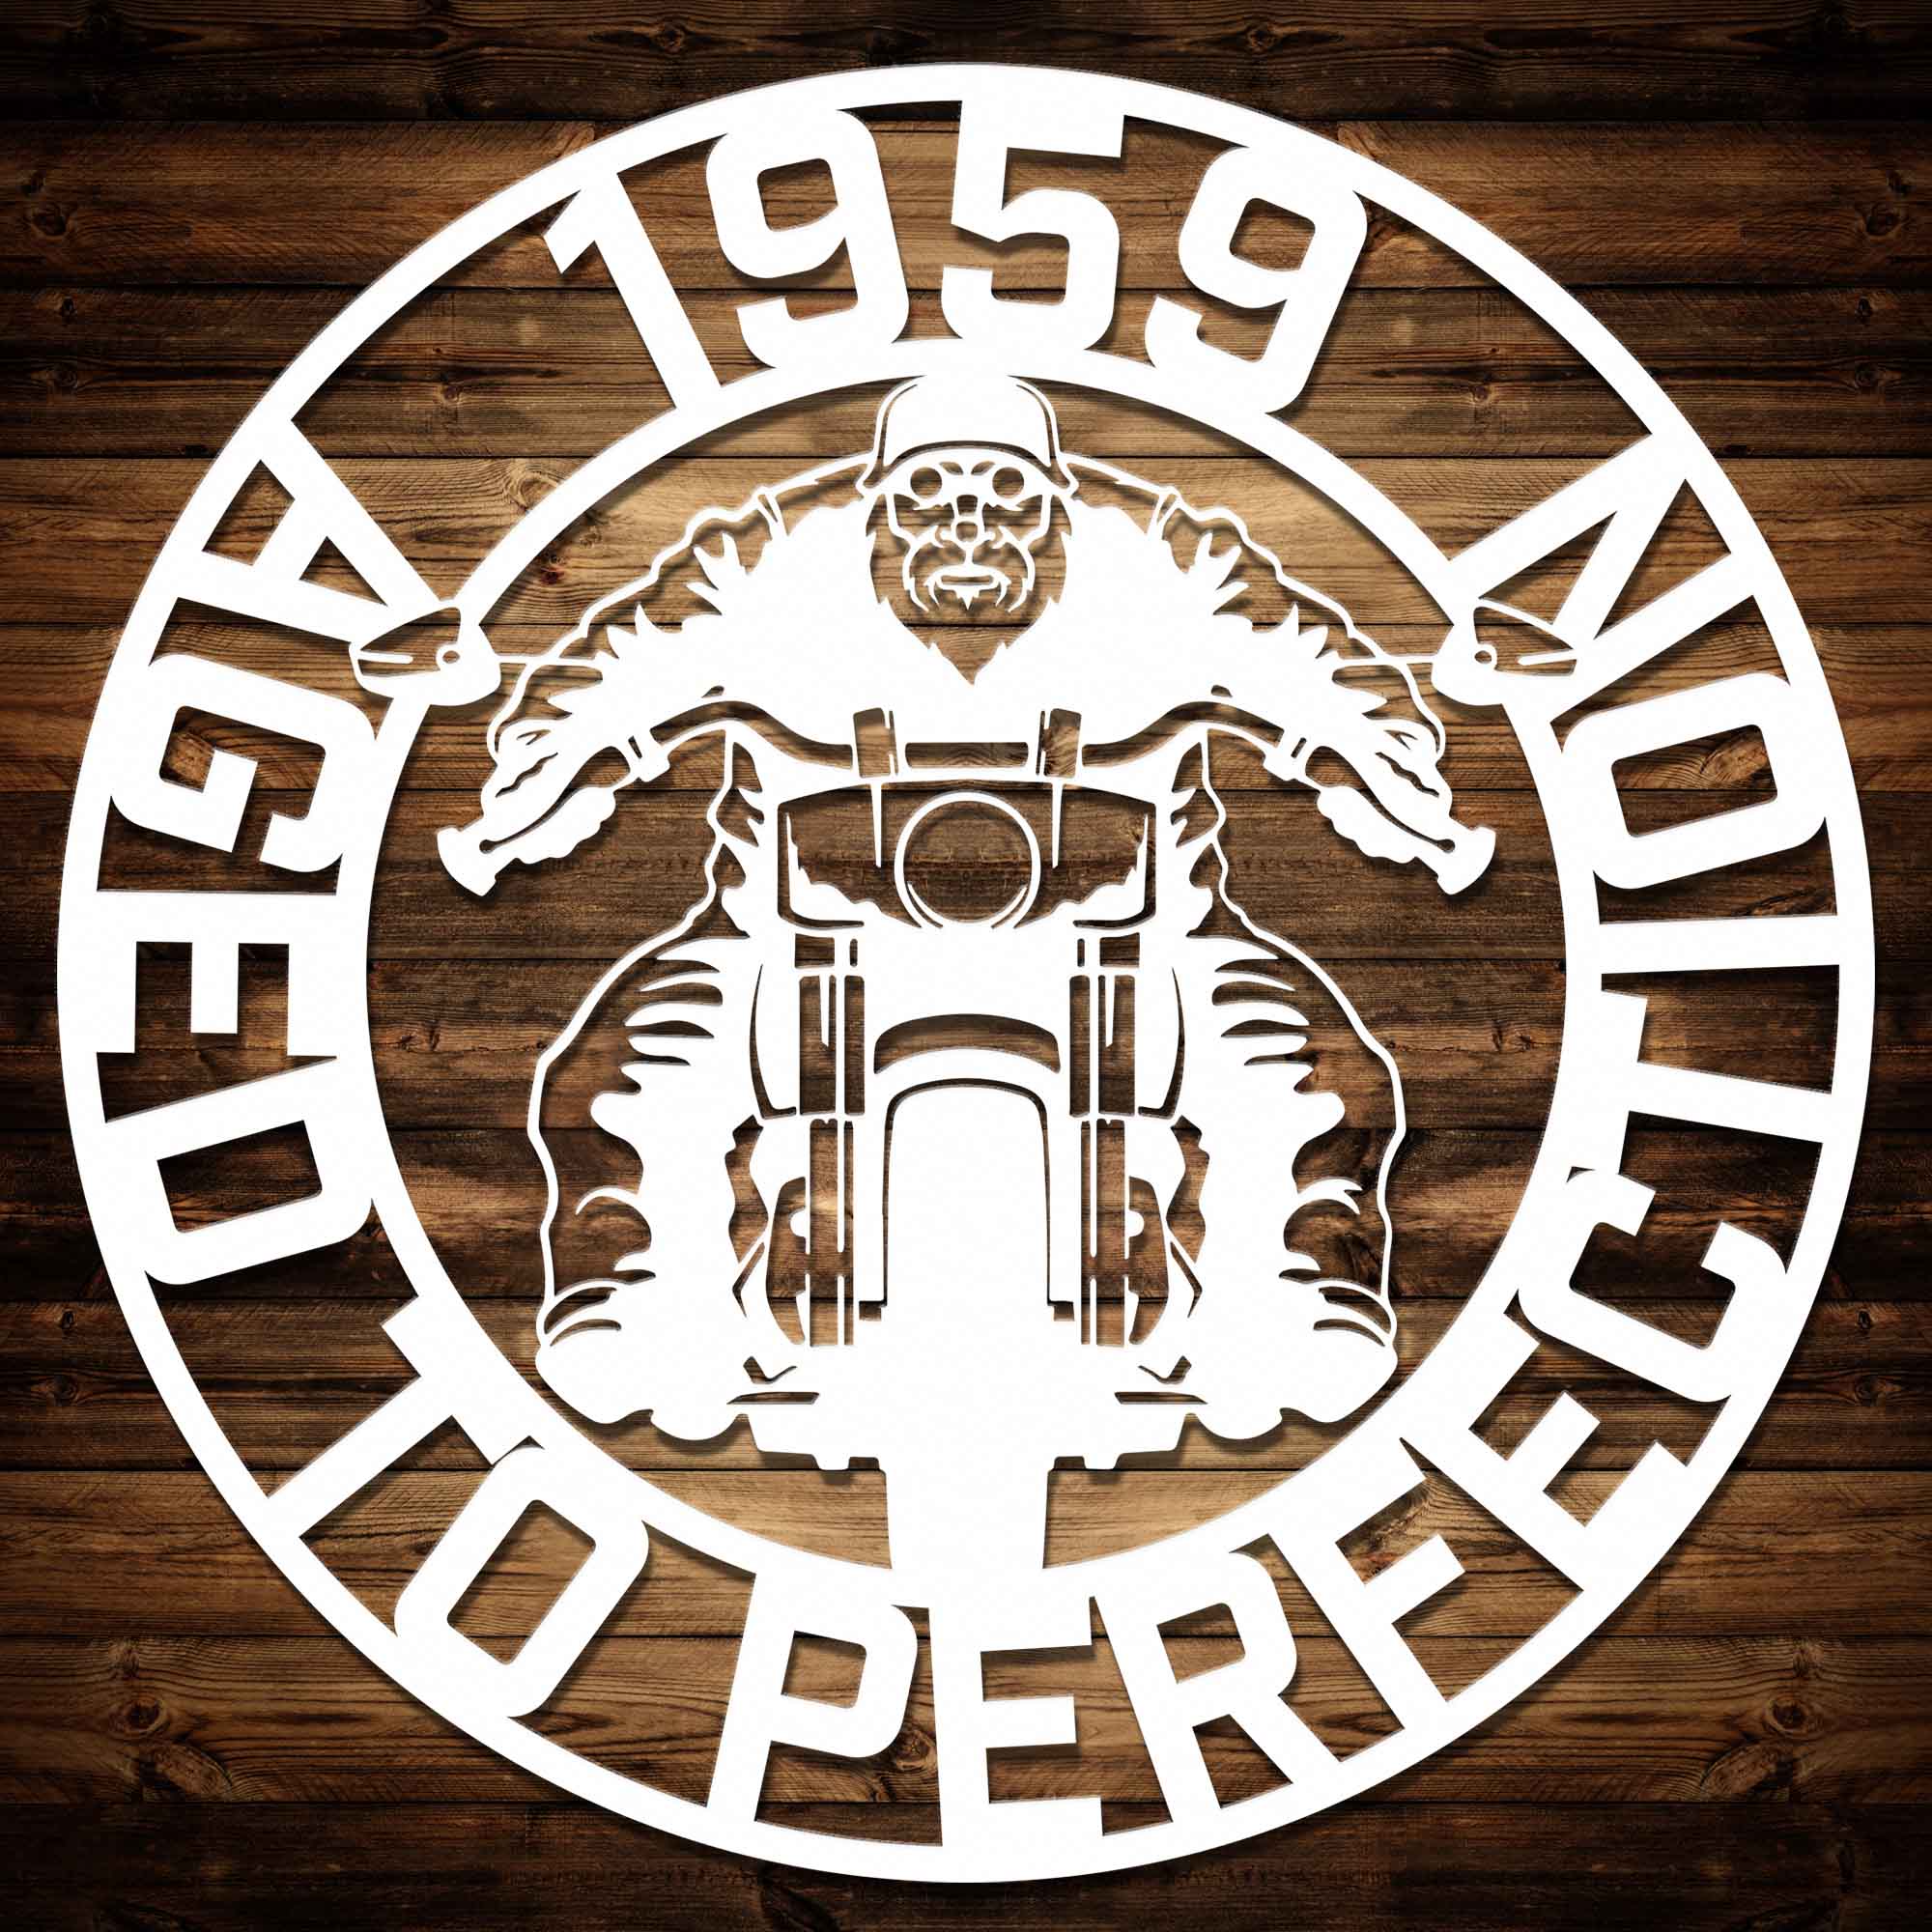 Biker Aged to Perfection - Personalized Metal Wall Art